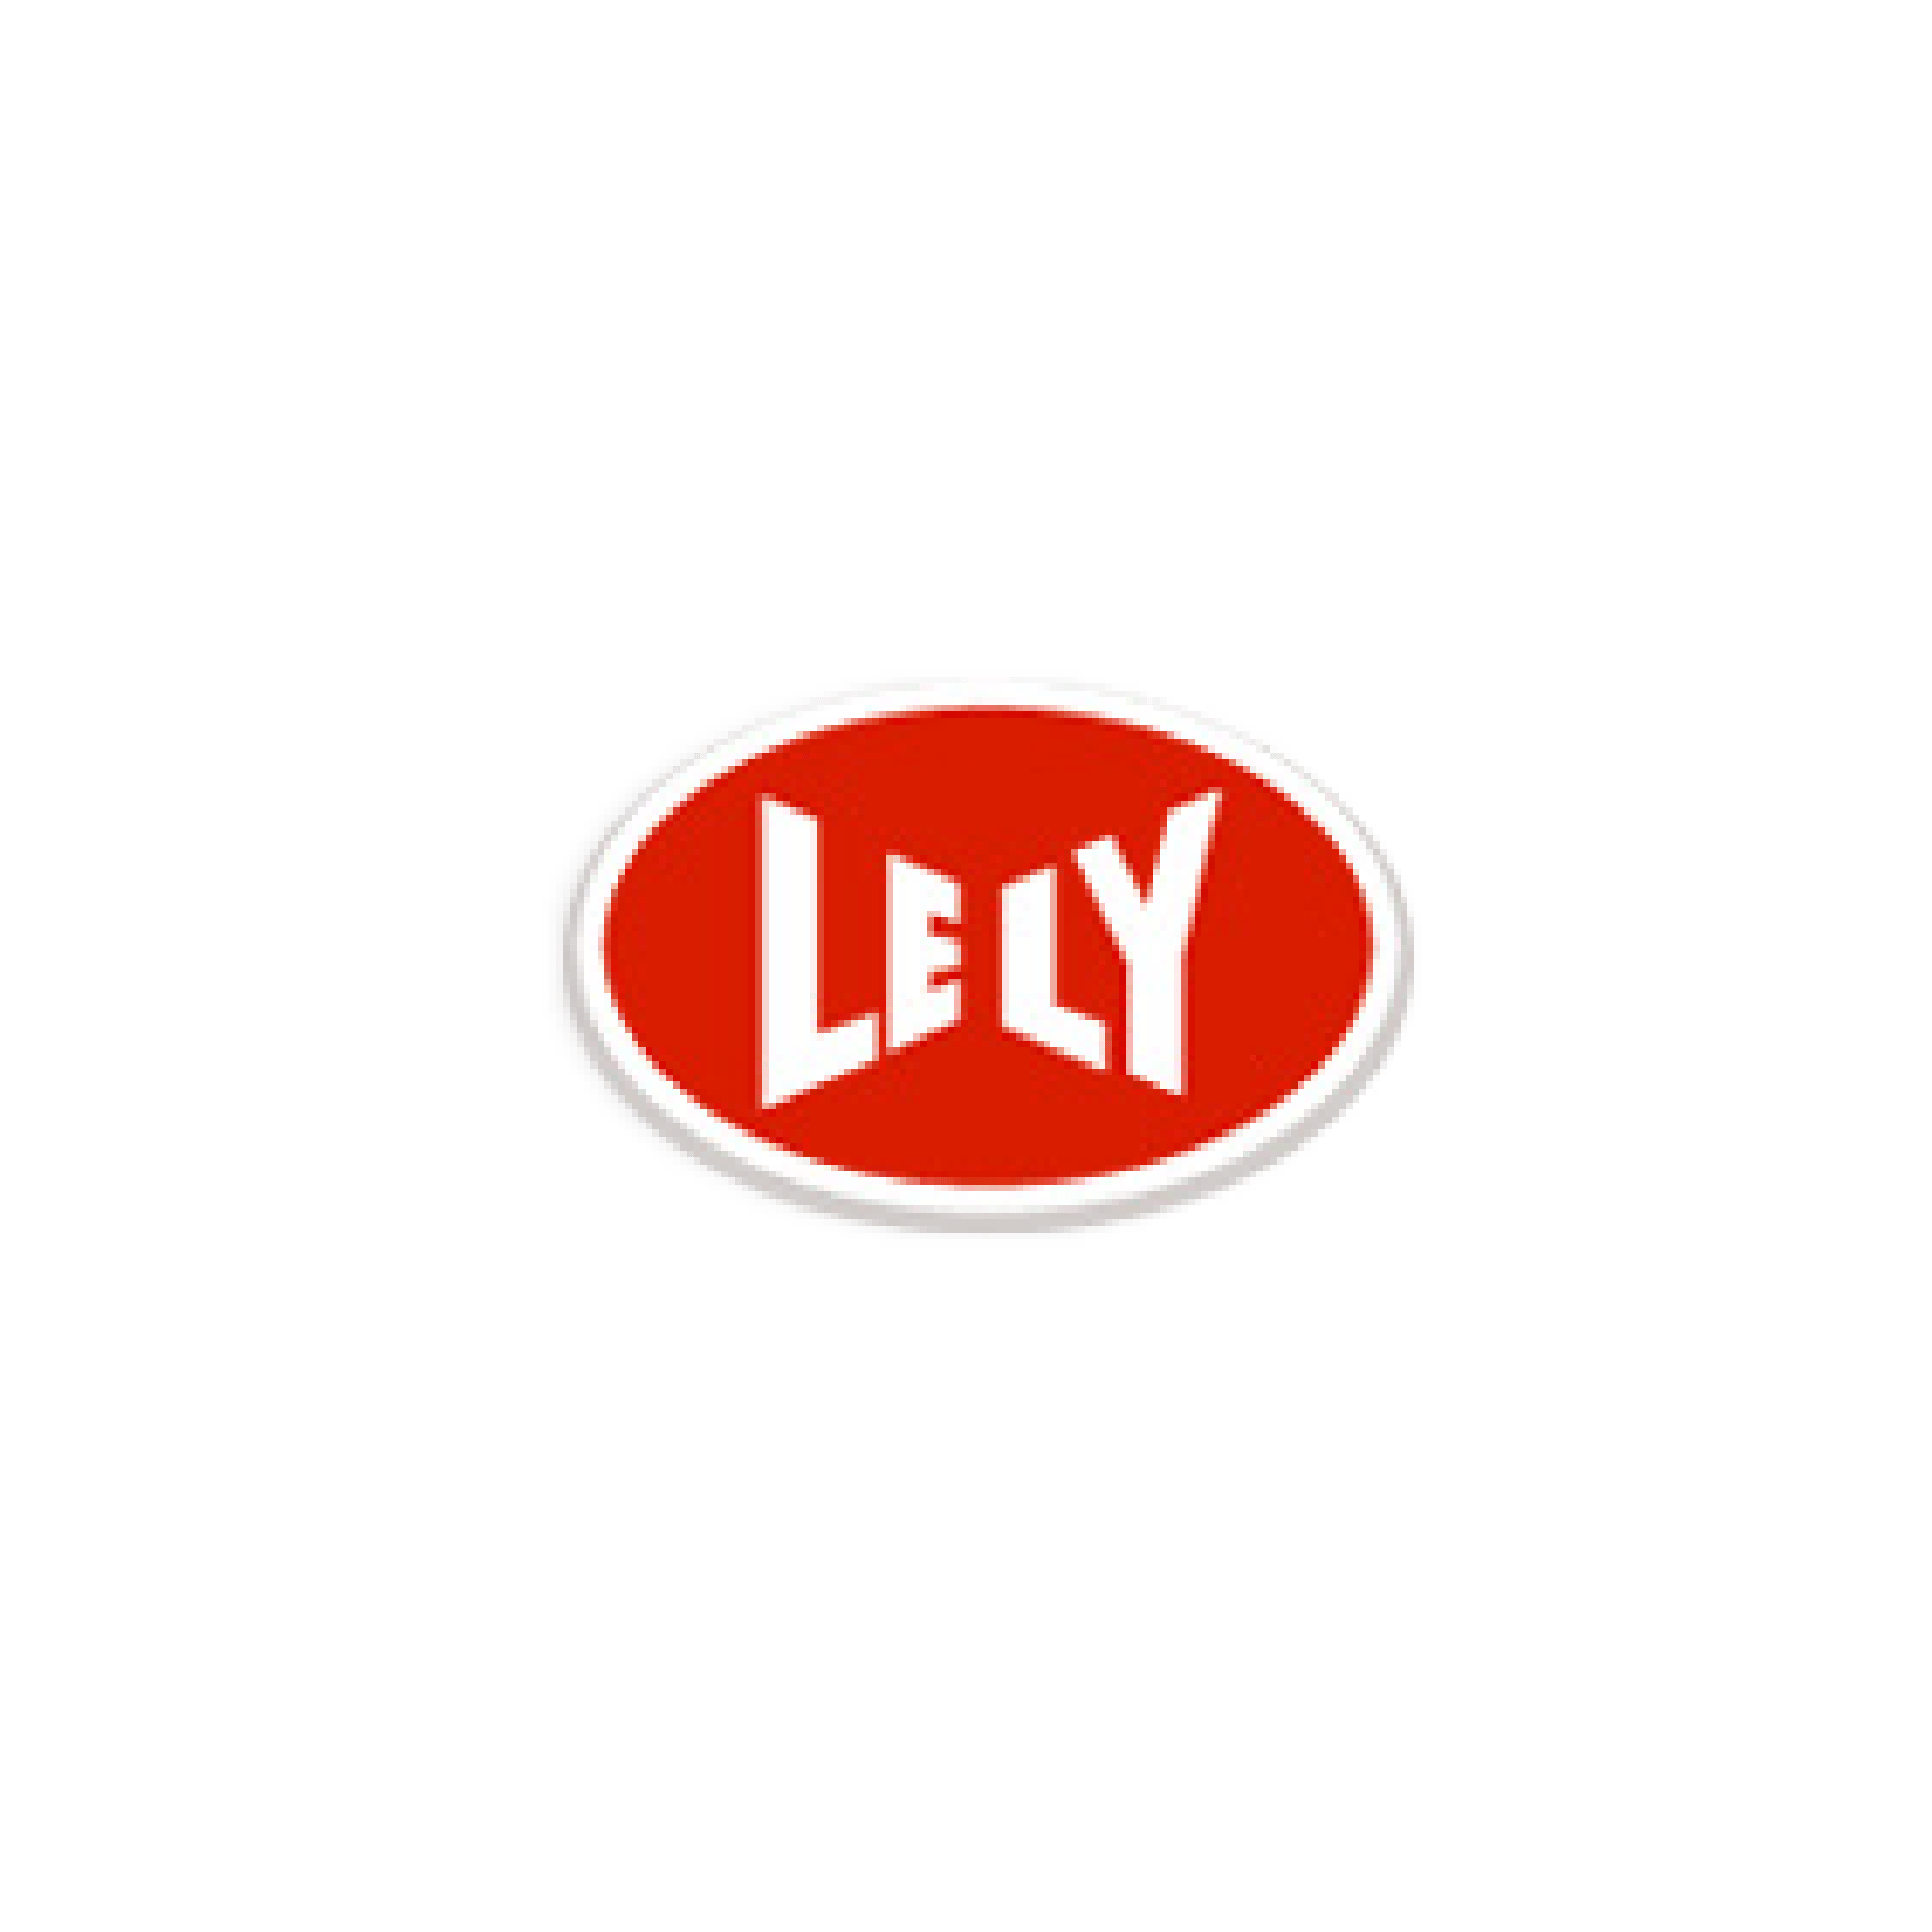 Lely Logo - Our customers - Manufacturers, retailers & wholesailers - CloudSuite